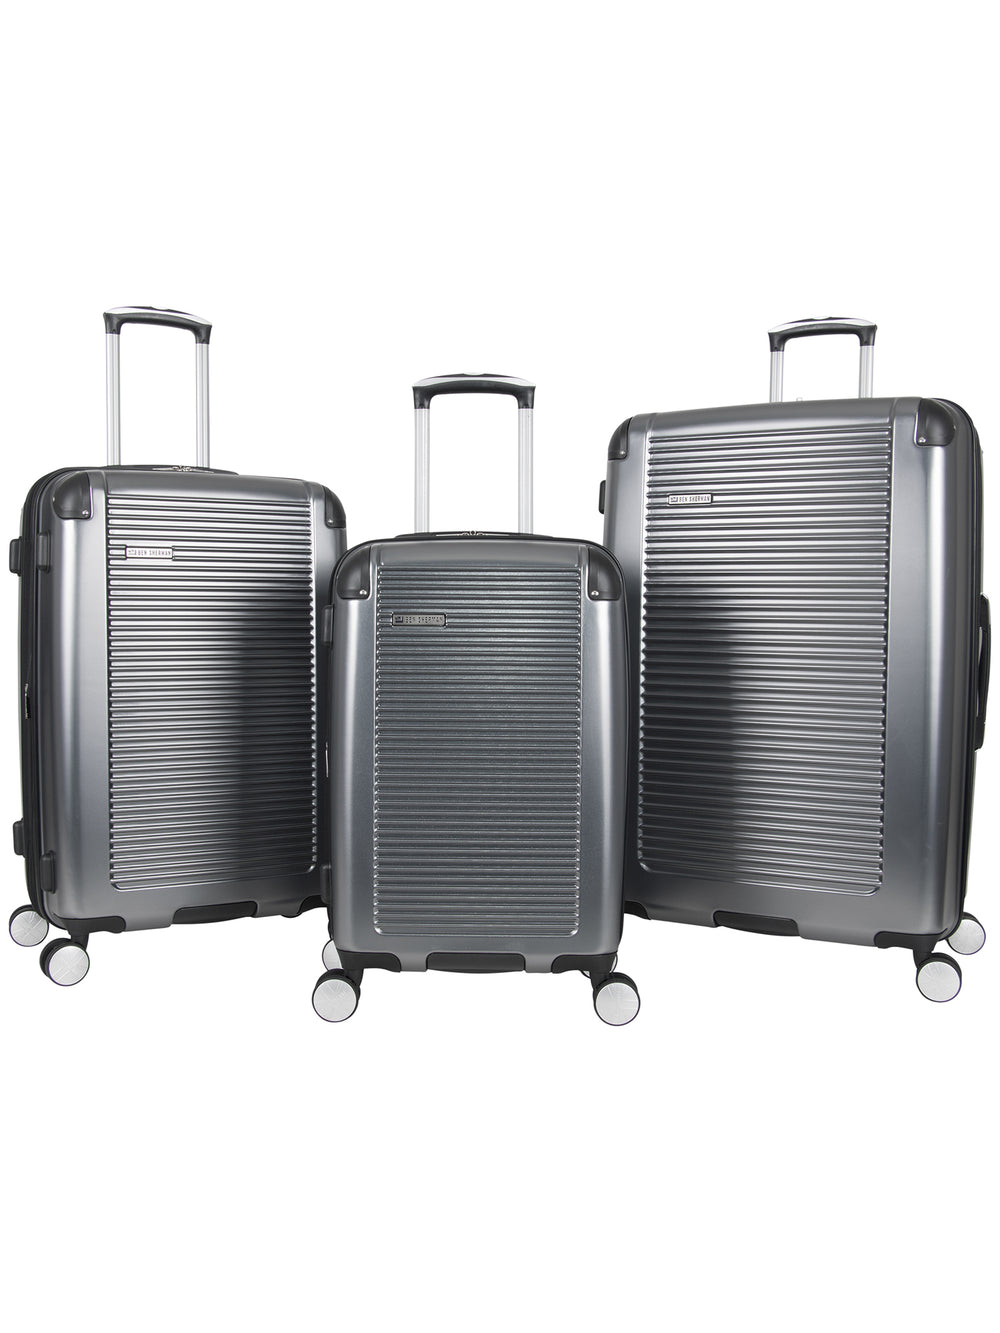 Norwich 3-Piece Expandable Hardside Luggage Collection - Gunmetal